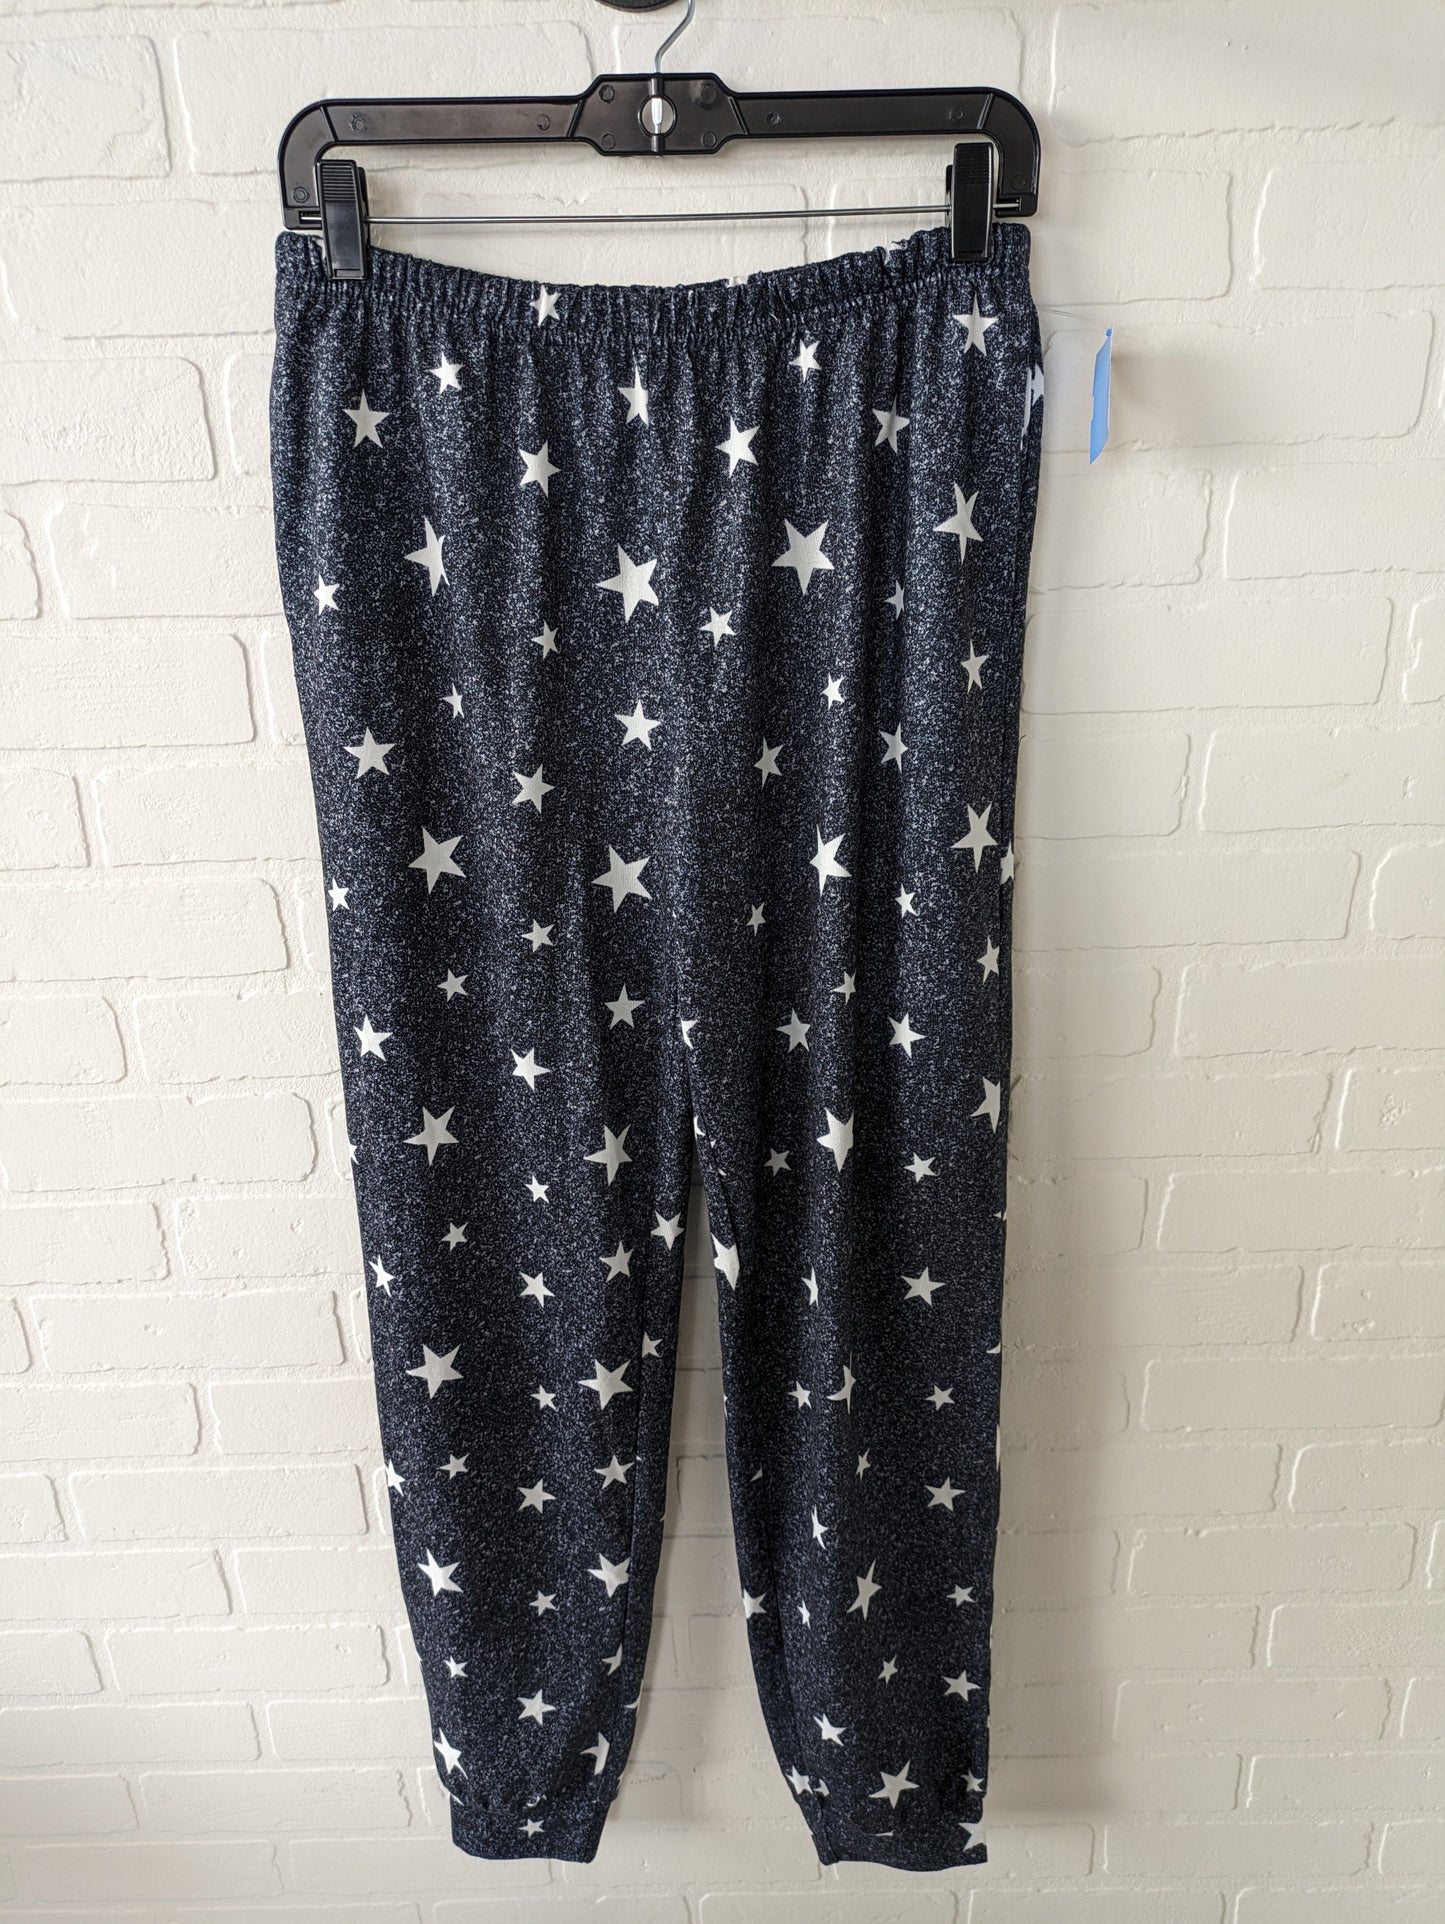 Pajamas 2pc By Clothes Mentor  Size: M